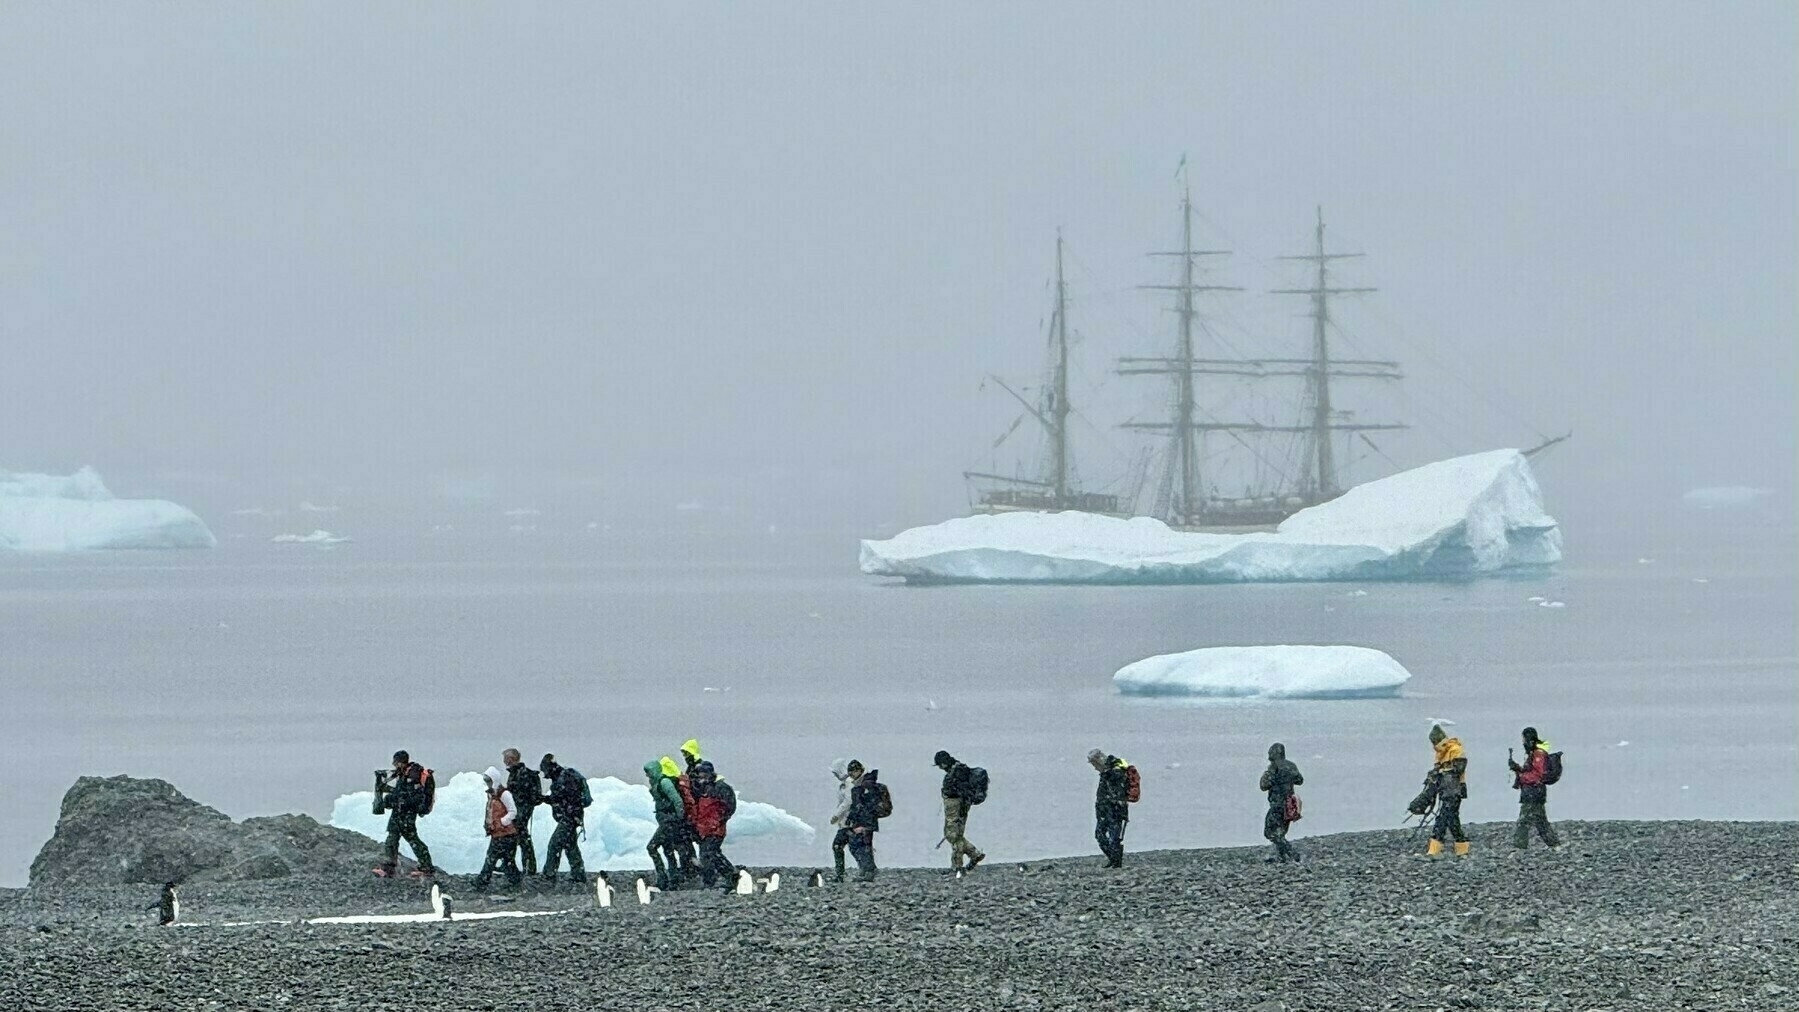 Dutch tall (sailing) ship behind an iceberg in the background, with several people and penguins walking along the beach in the snow in front